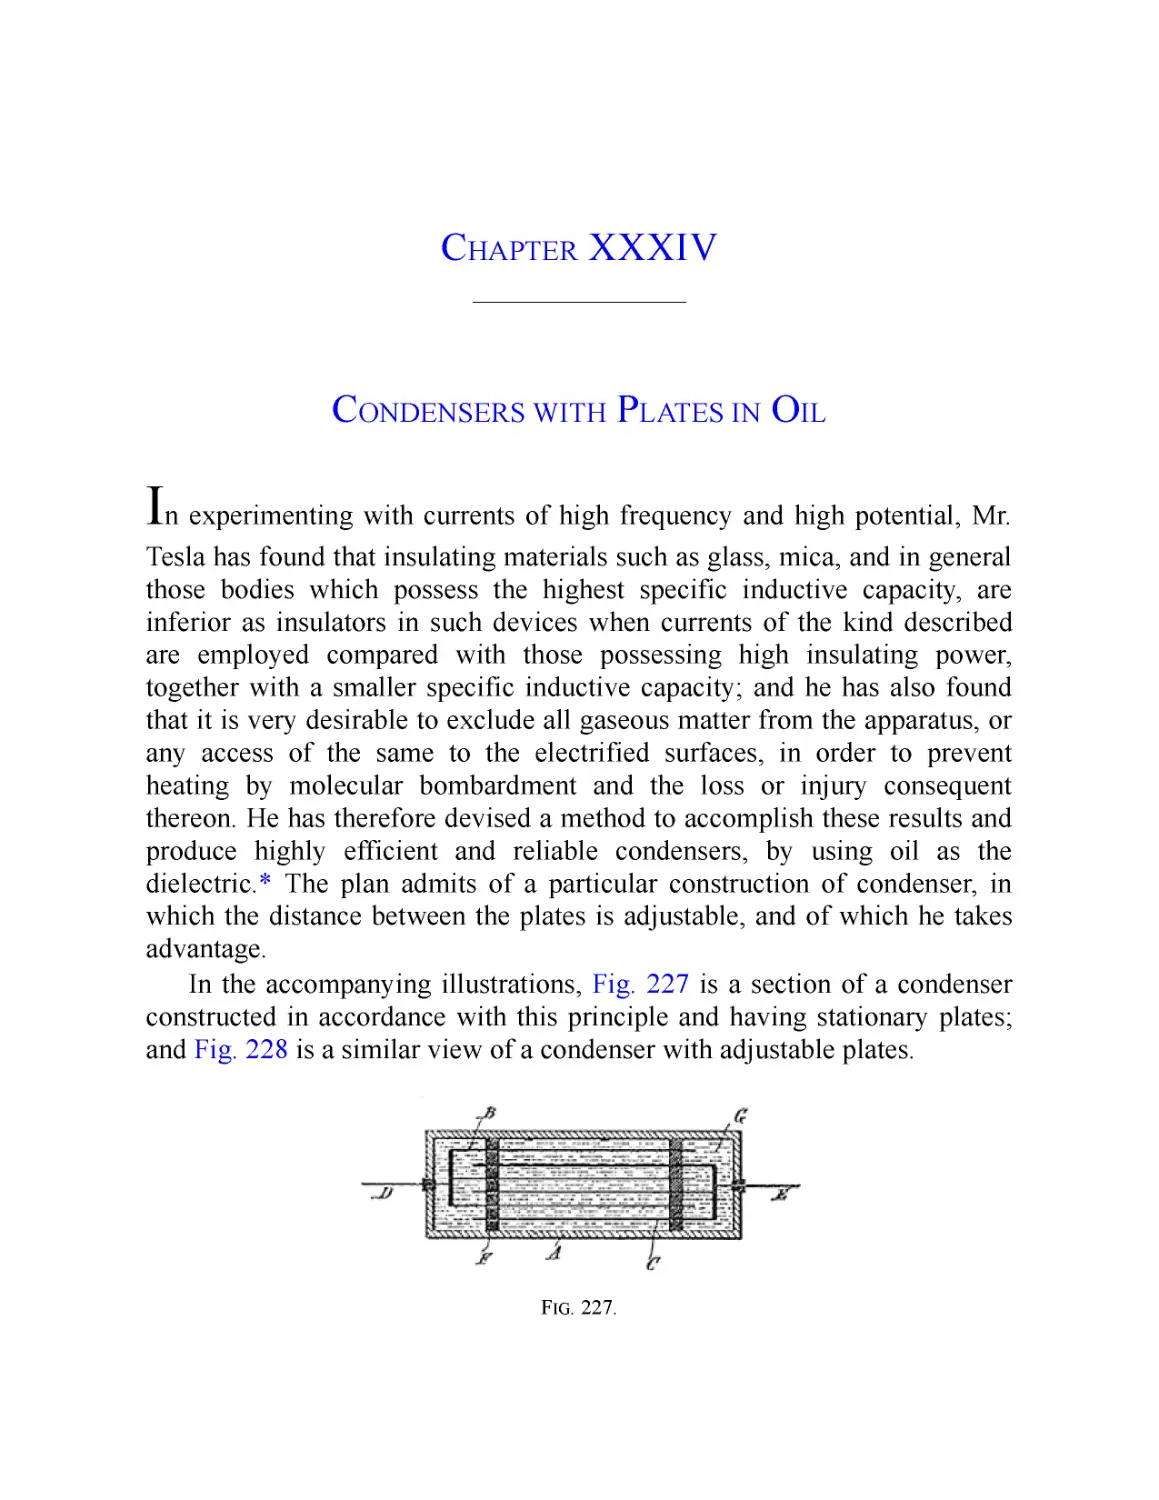 ﻿Chapter XXXIV: Condensers with Plates in Oi